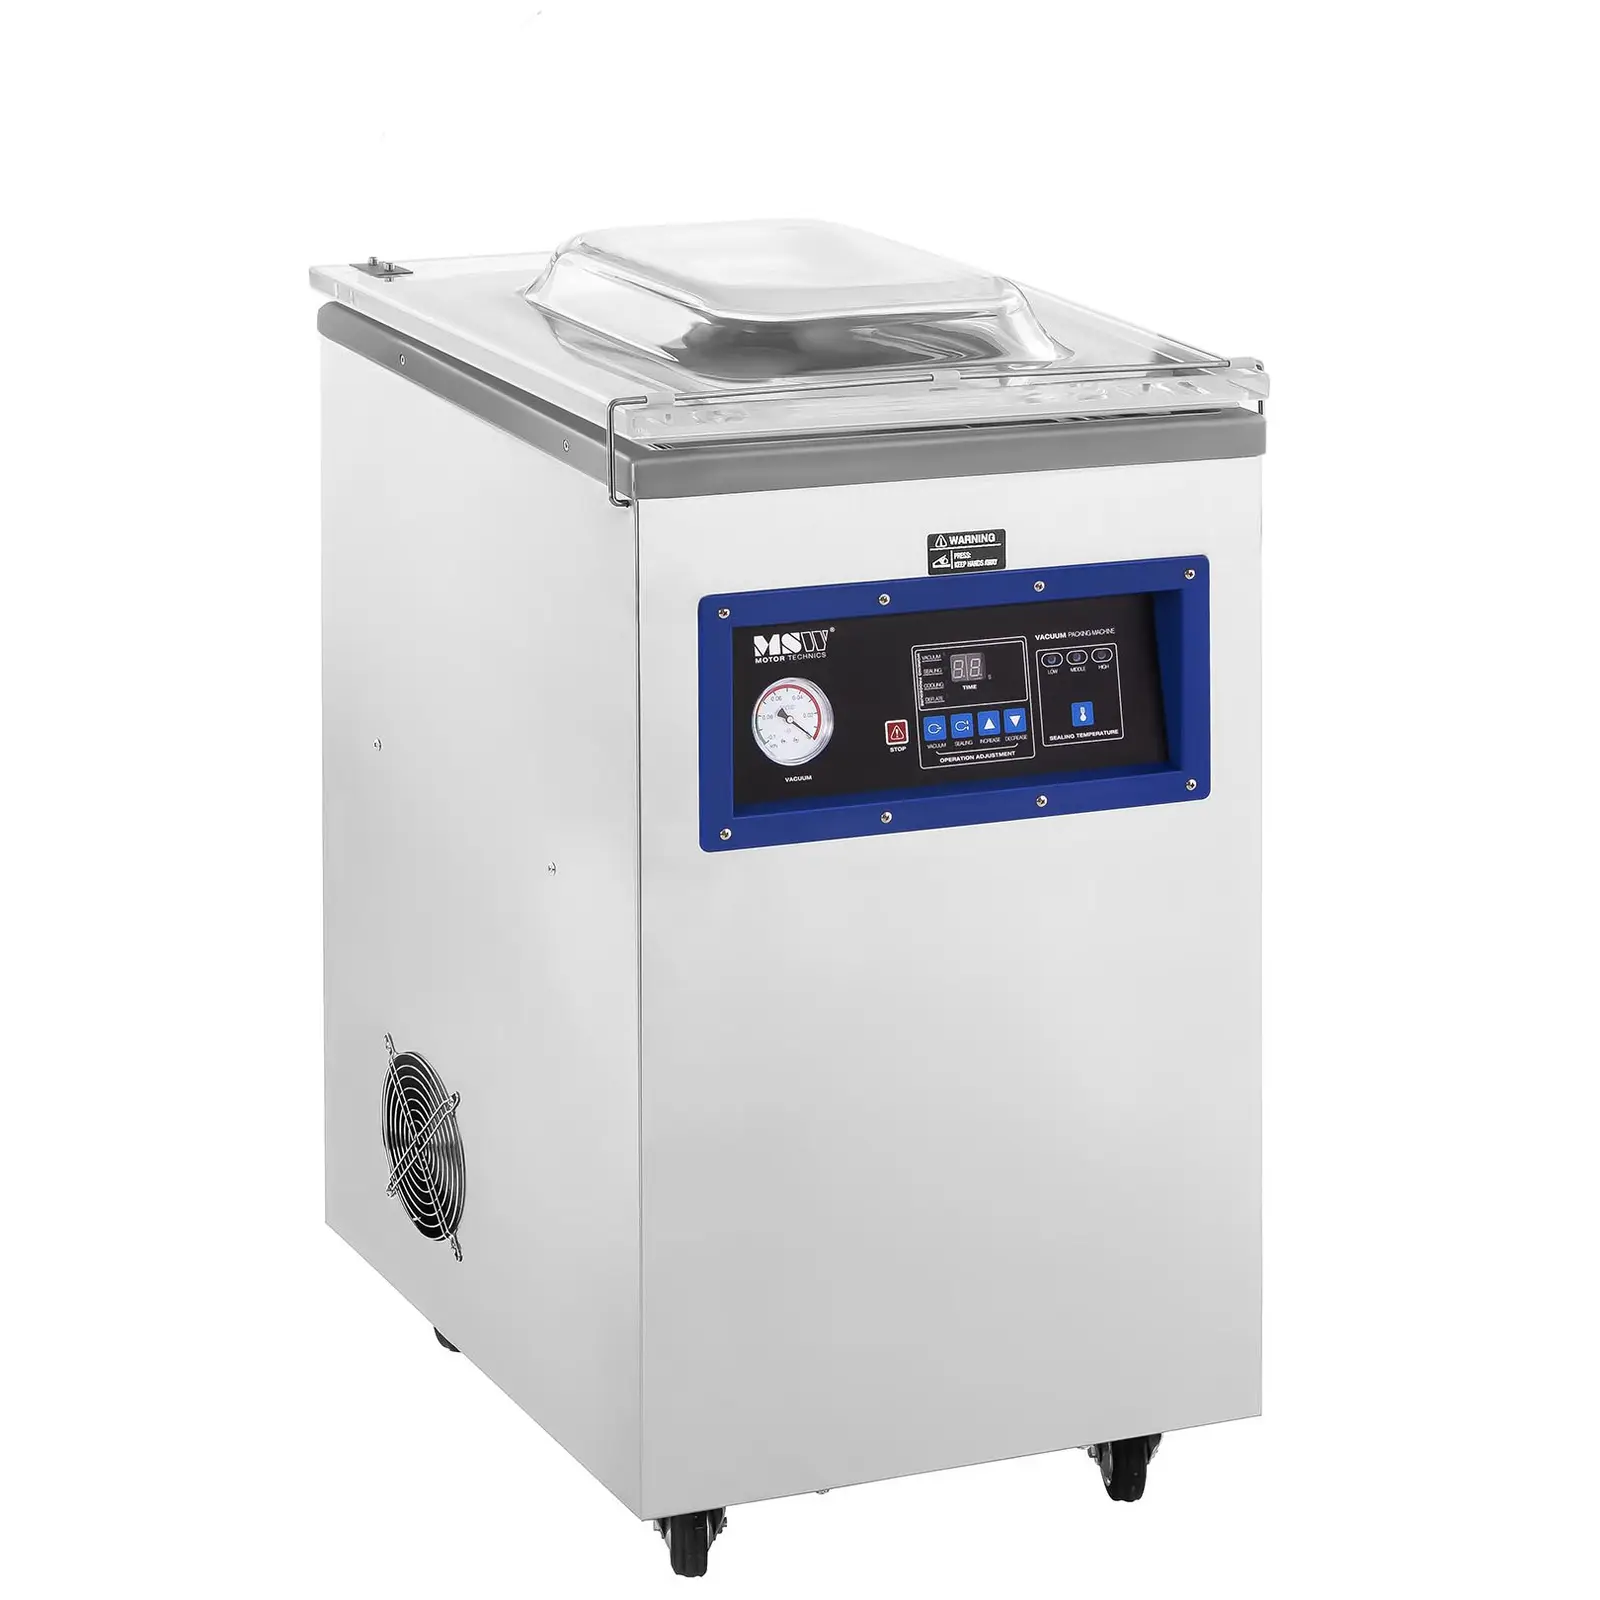 Vacuum Packaging Machine with trolley - 900 W